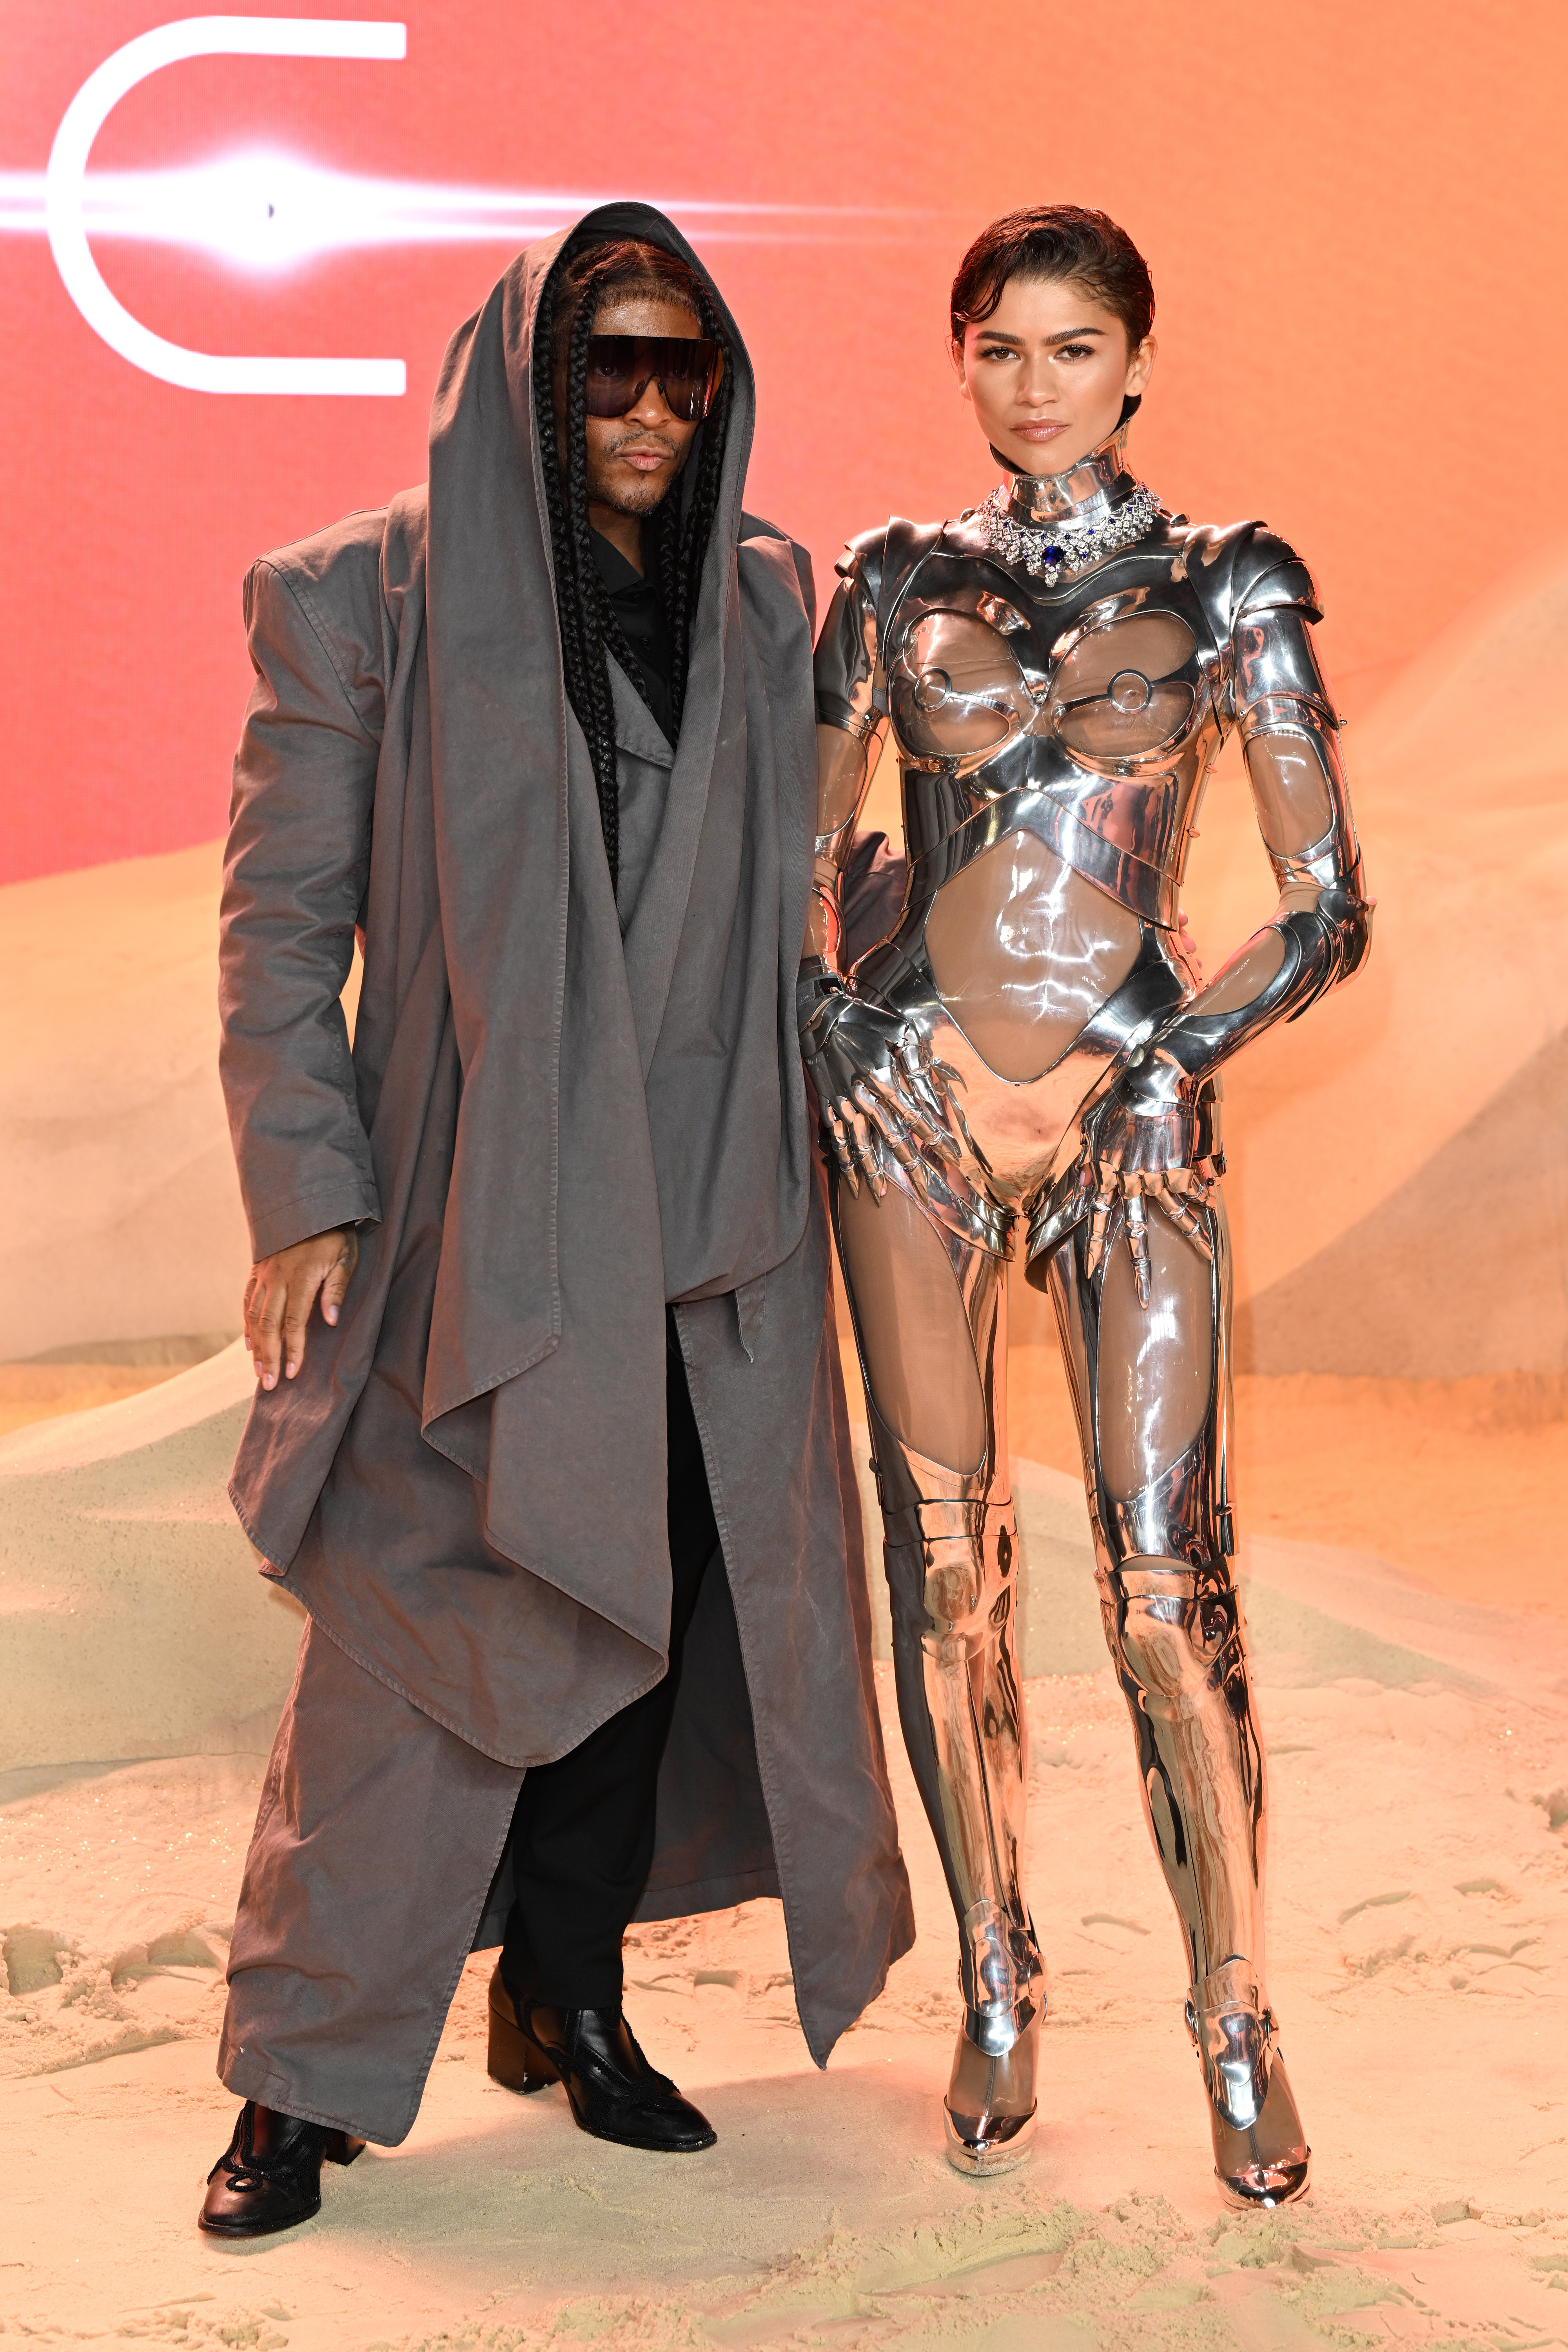 Two individuals in unique fashion attire posing together; one in a draped, hooded ensemble, and the other in a metallic bodysuit